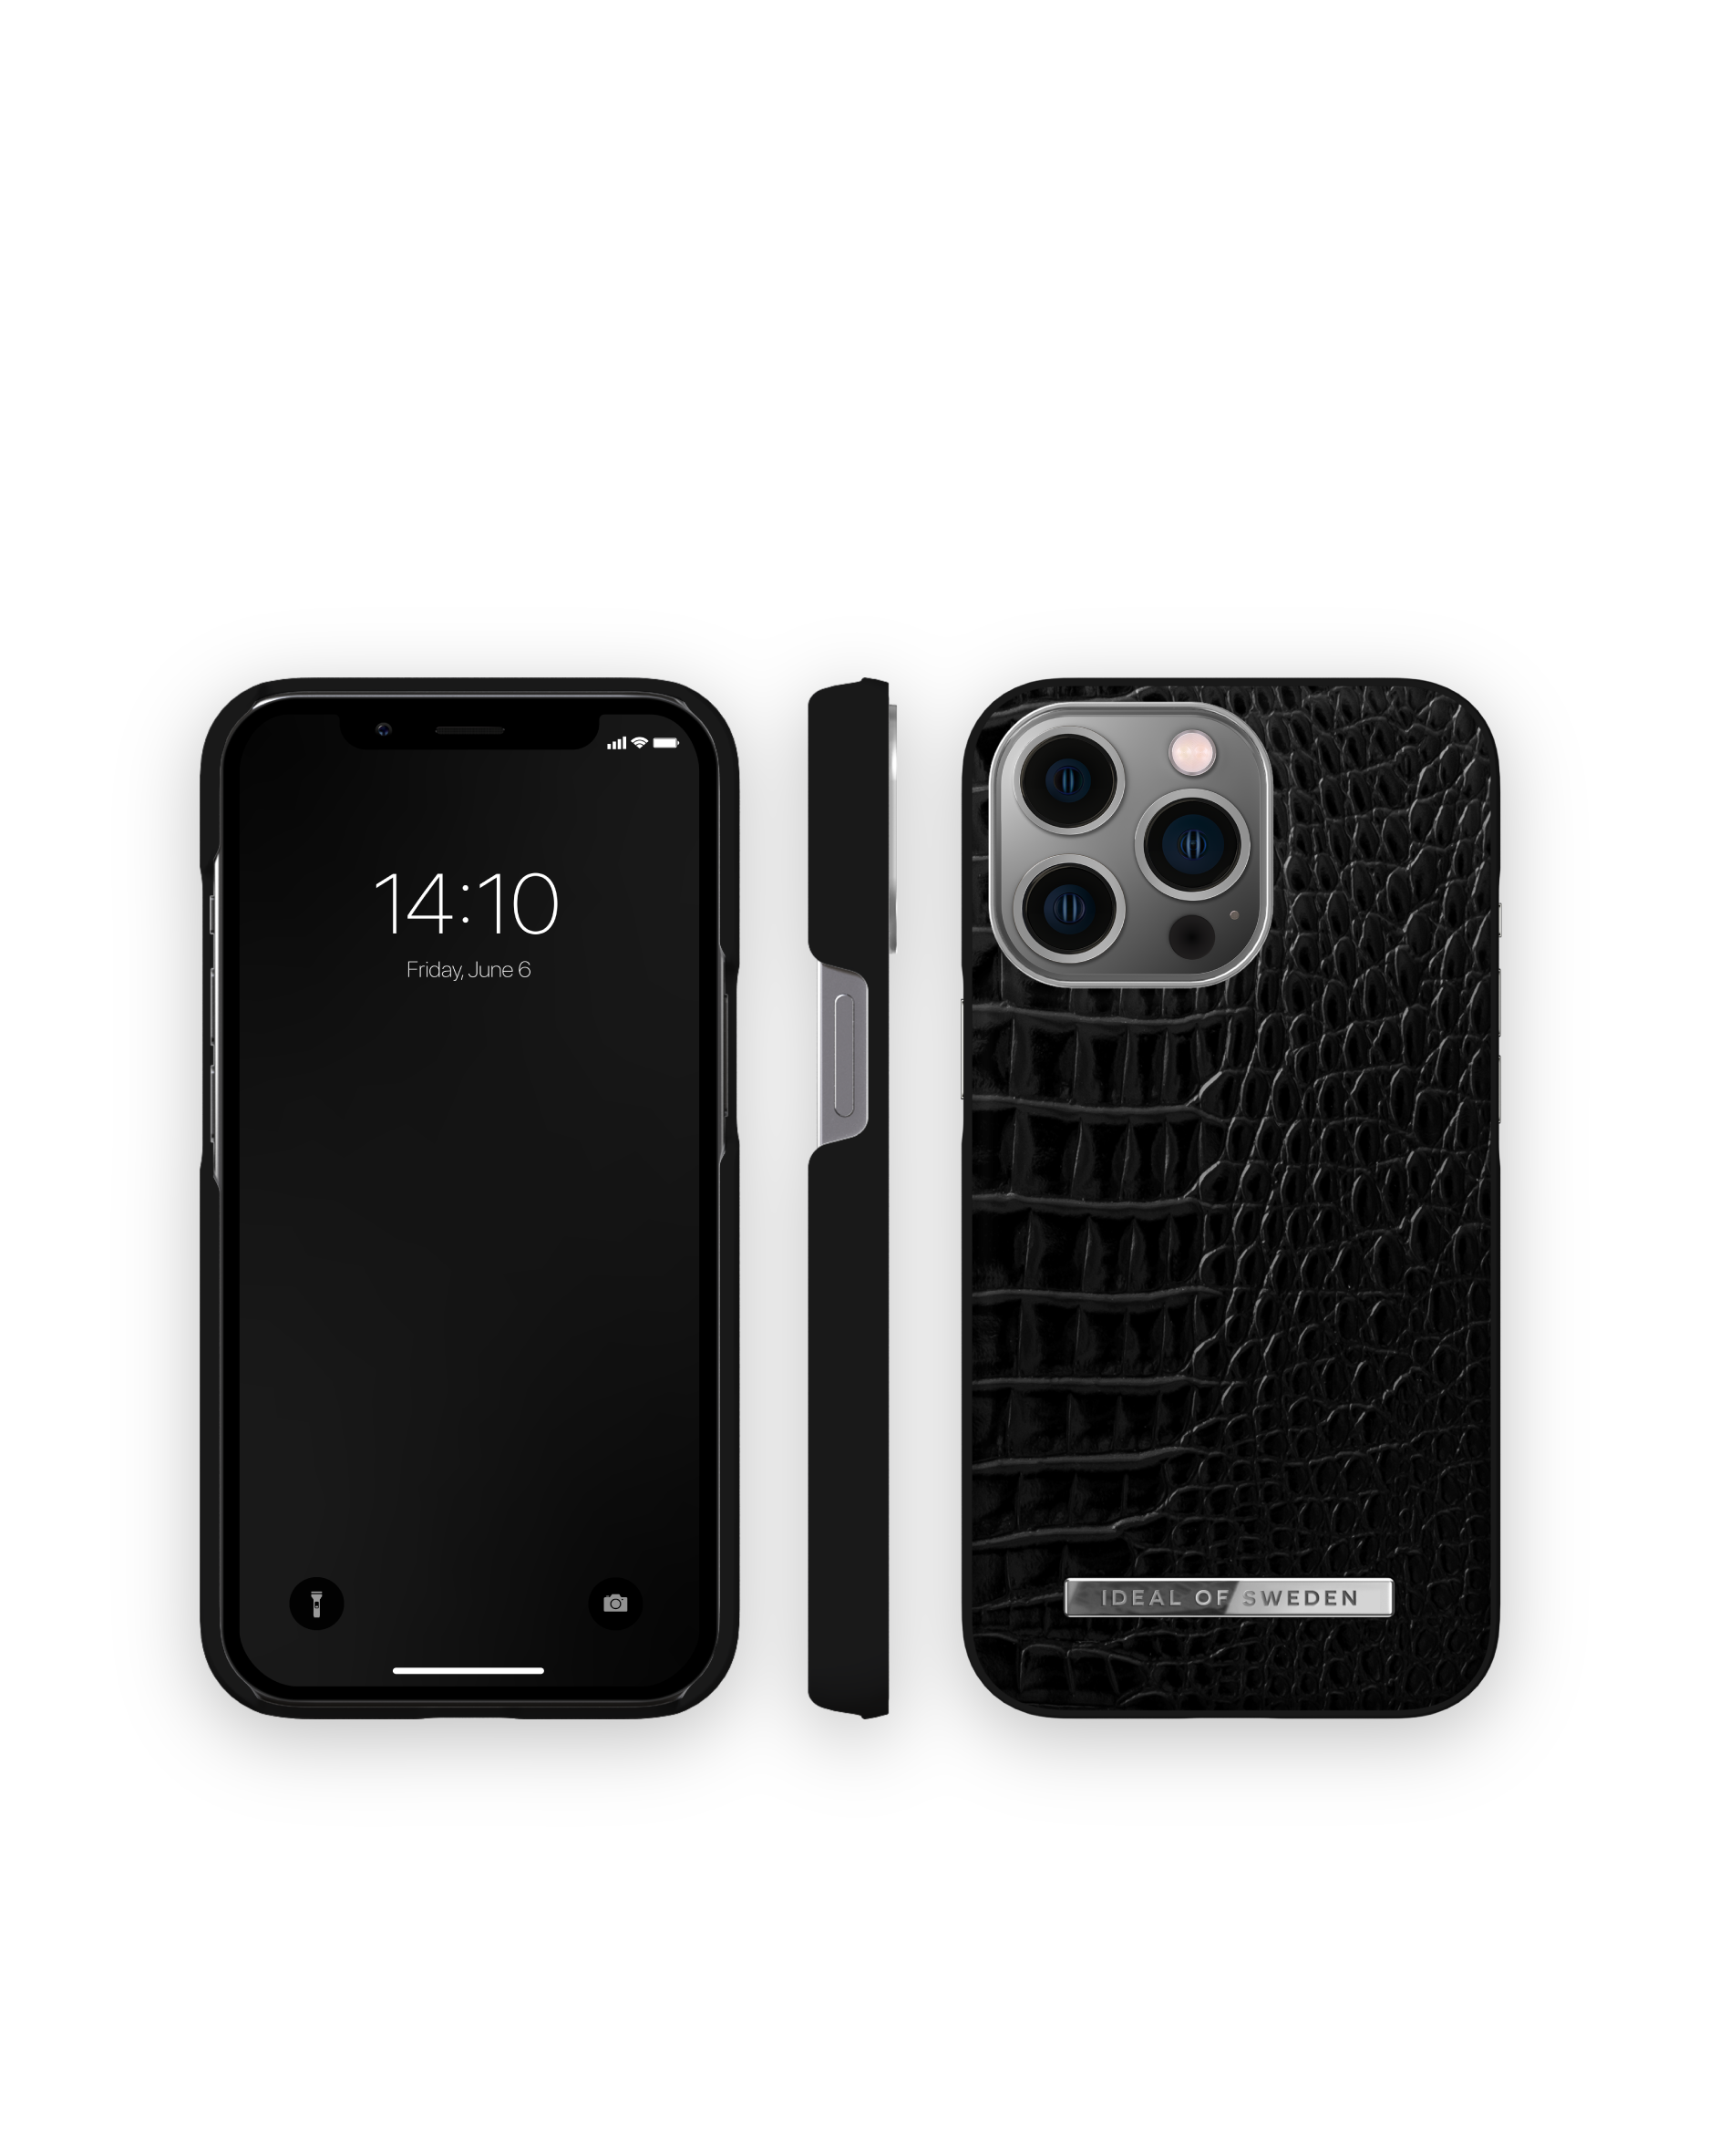 iPhone Backcover, Apple, Neo SWEDEN 13 Noir OF IDACSS21-I2161P-306, Silver Pro, IDEAL Croco